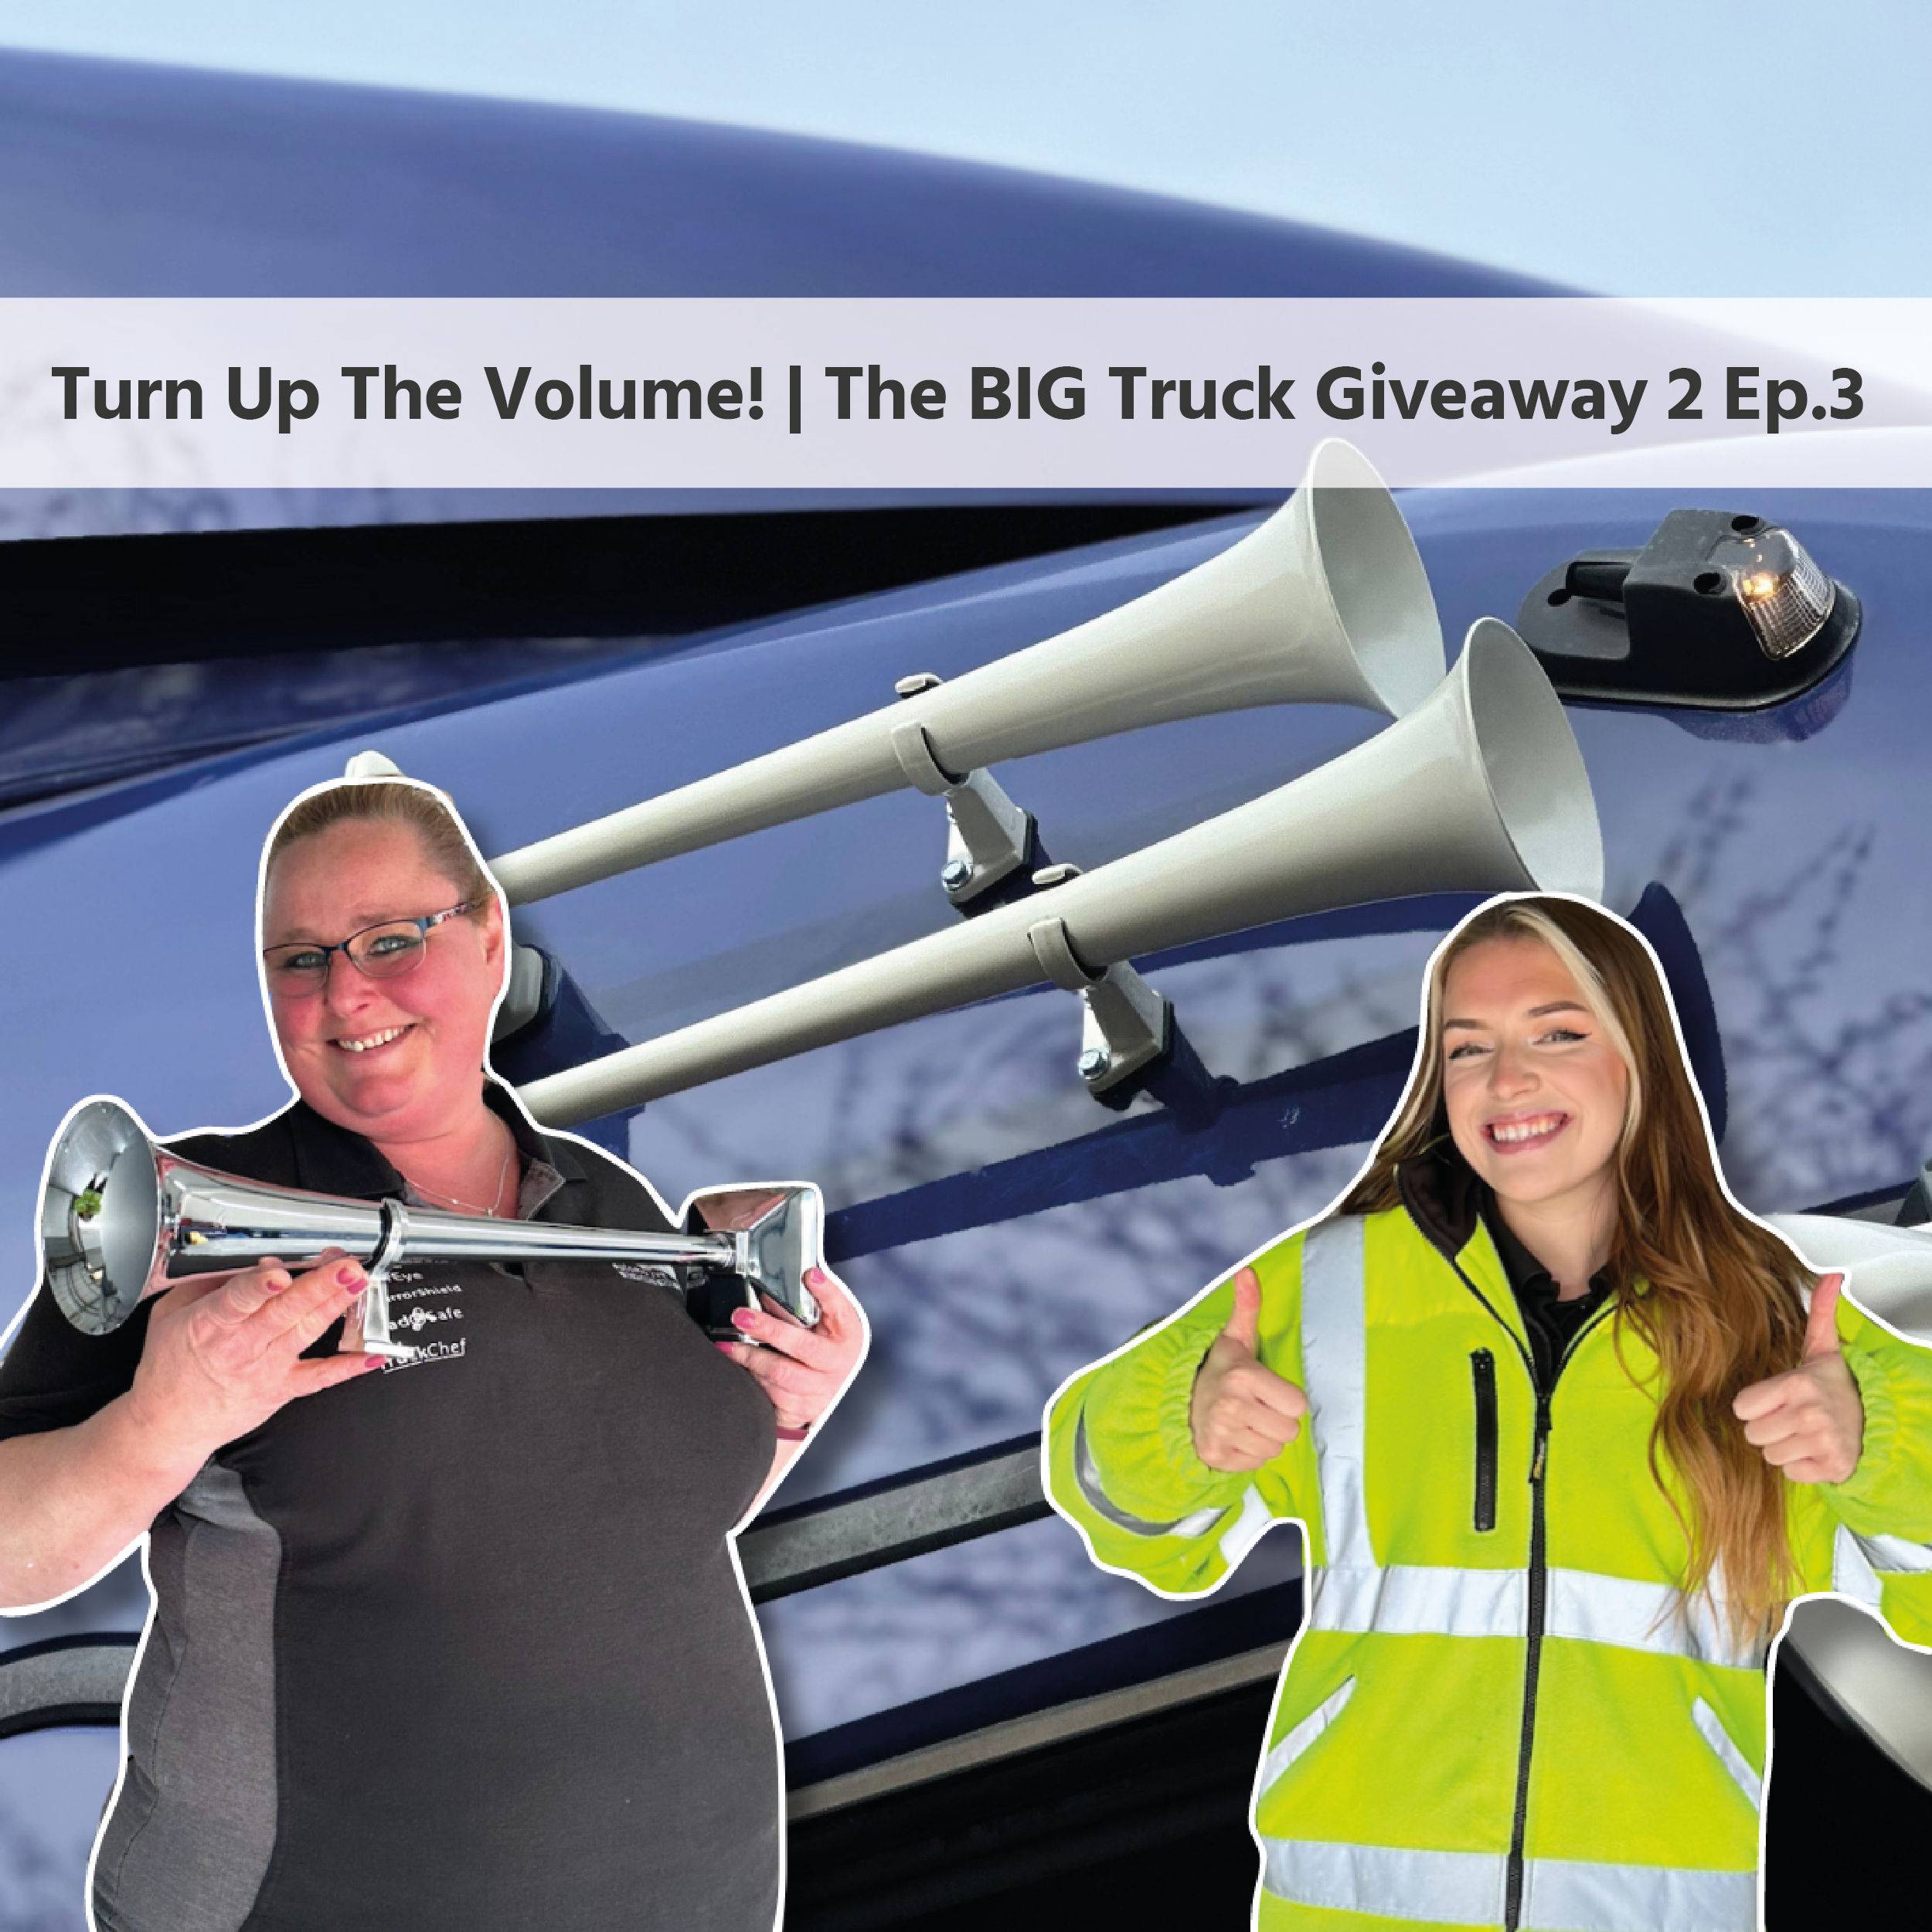 Turning Up The Volume! | The BIG Truck Giveaway 2